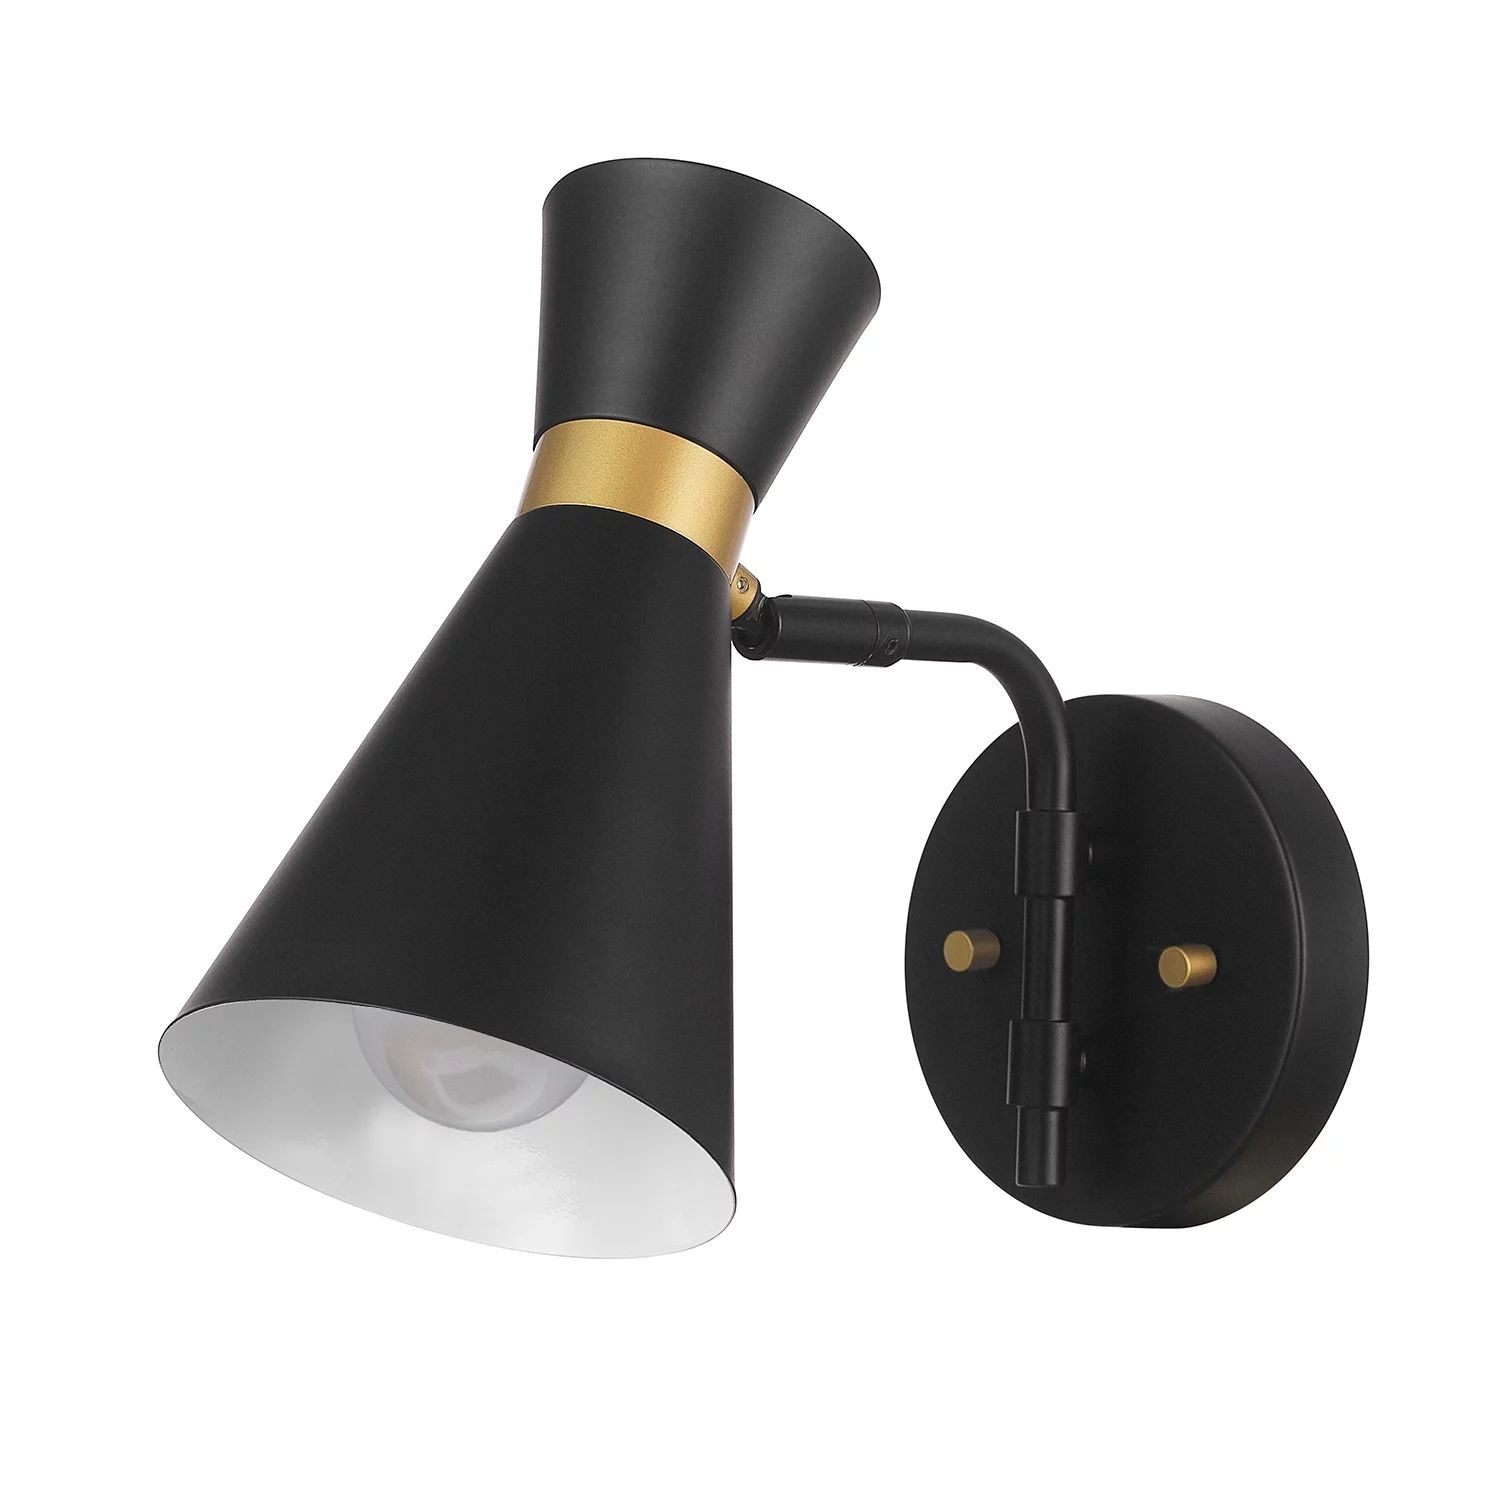 Better Home and Garden 1 Light wall sconce, matte black finish with Burnished brass accent, CETLU... | Walmart (US)